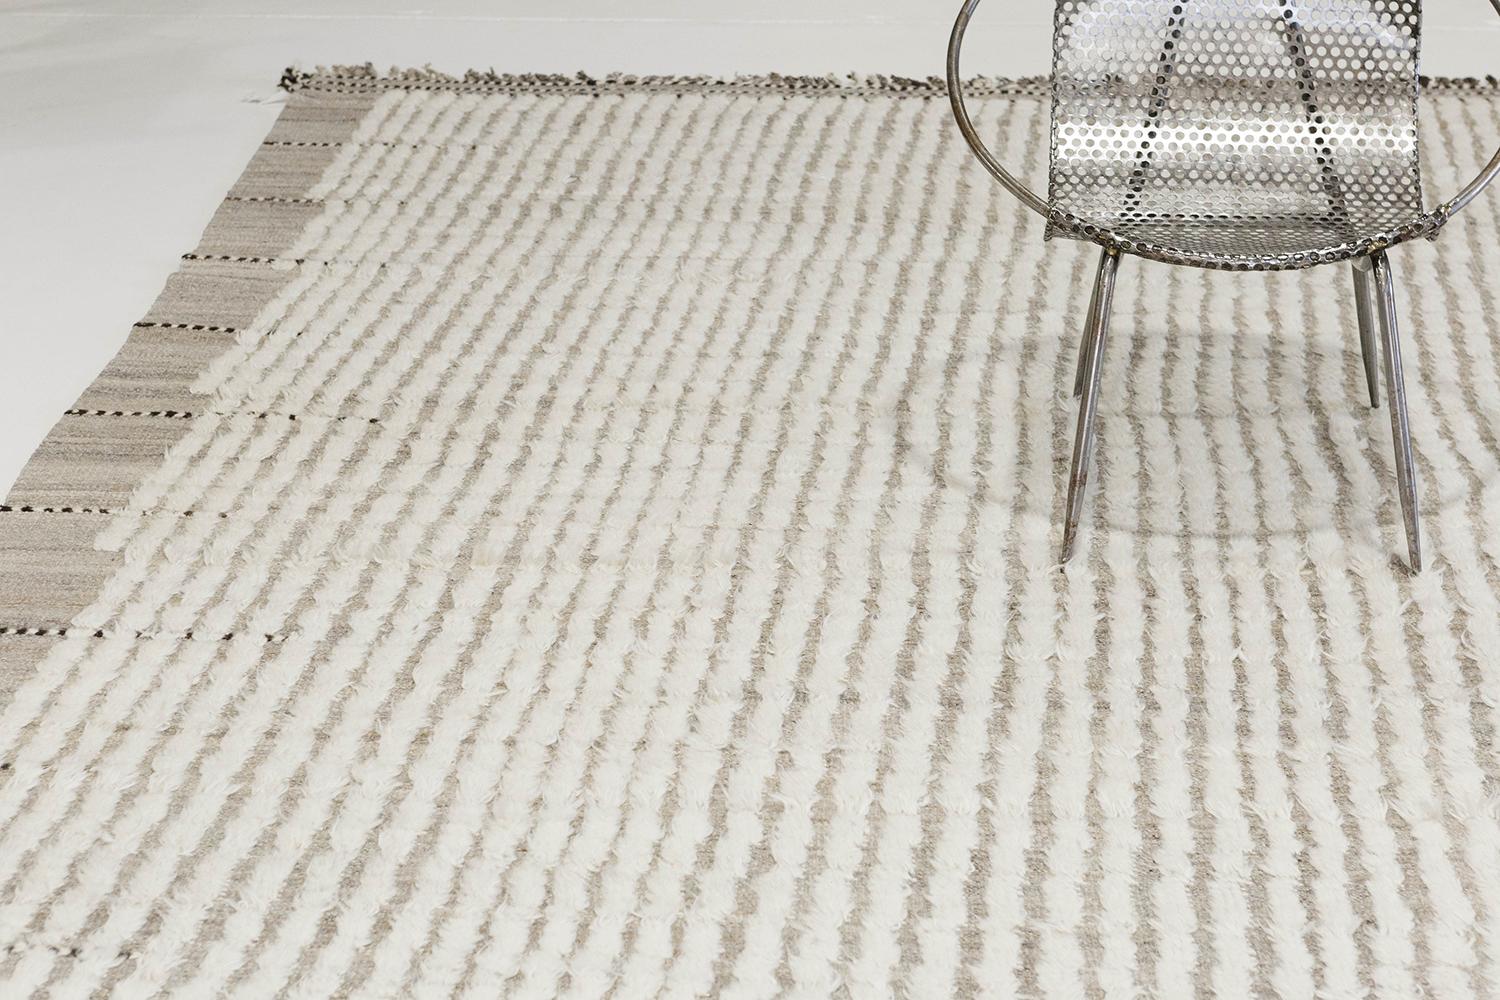 The signature Collection of California. Handwoven luxurious wool rug, made of timeless design elements and neutral earth tones with the perfect shade of white shag. Haute Bohemian collection: designed in Los Angeles named for the winds knitting